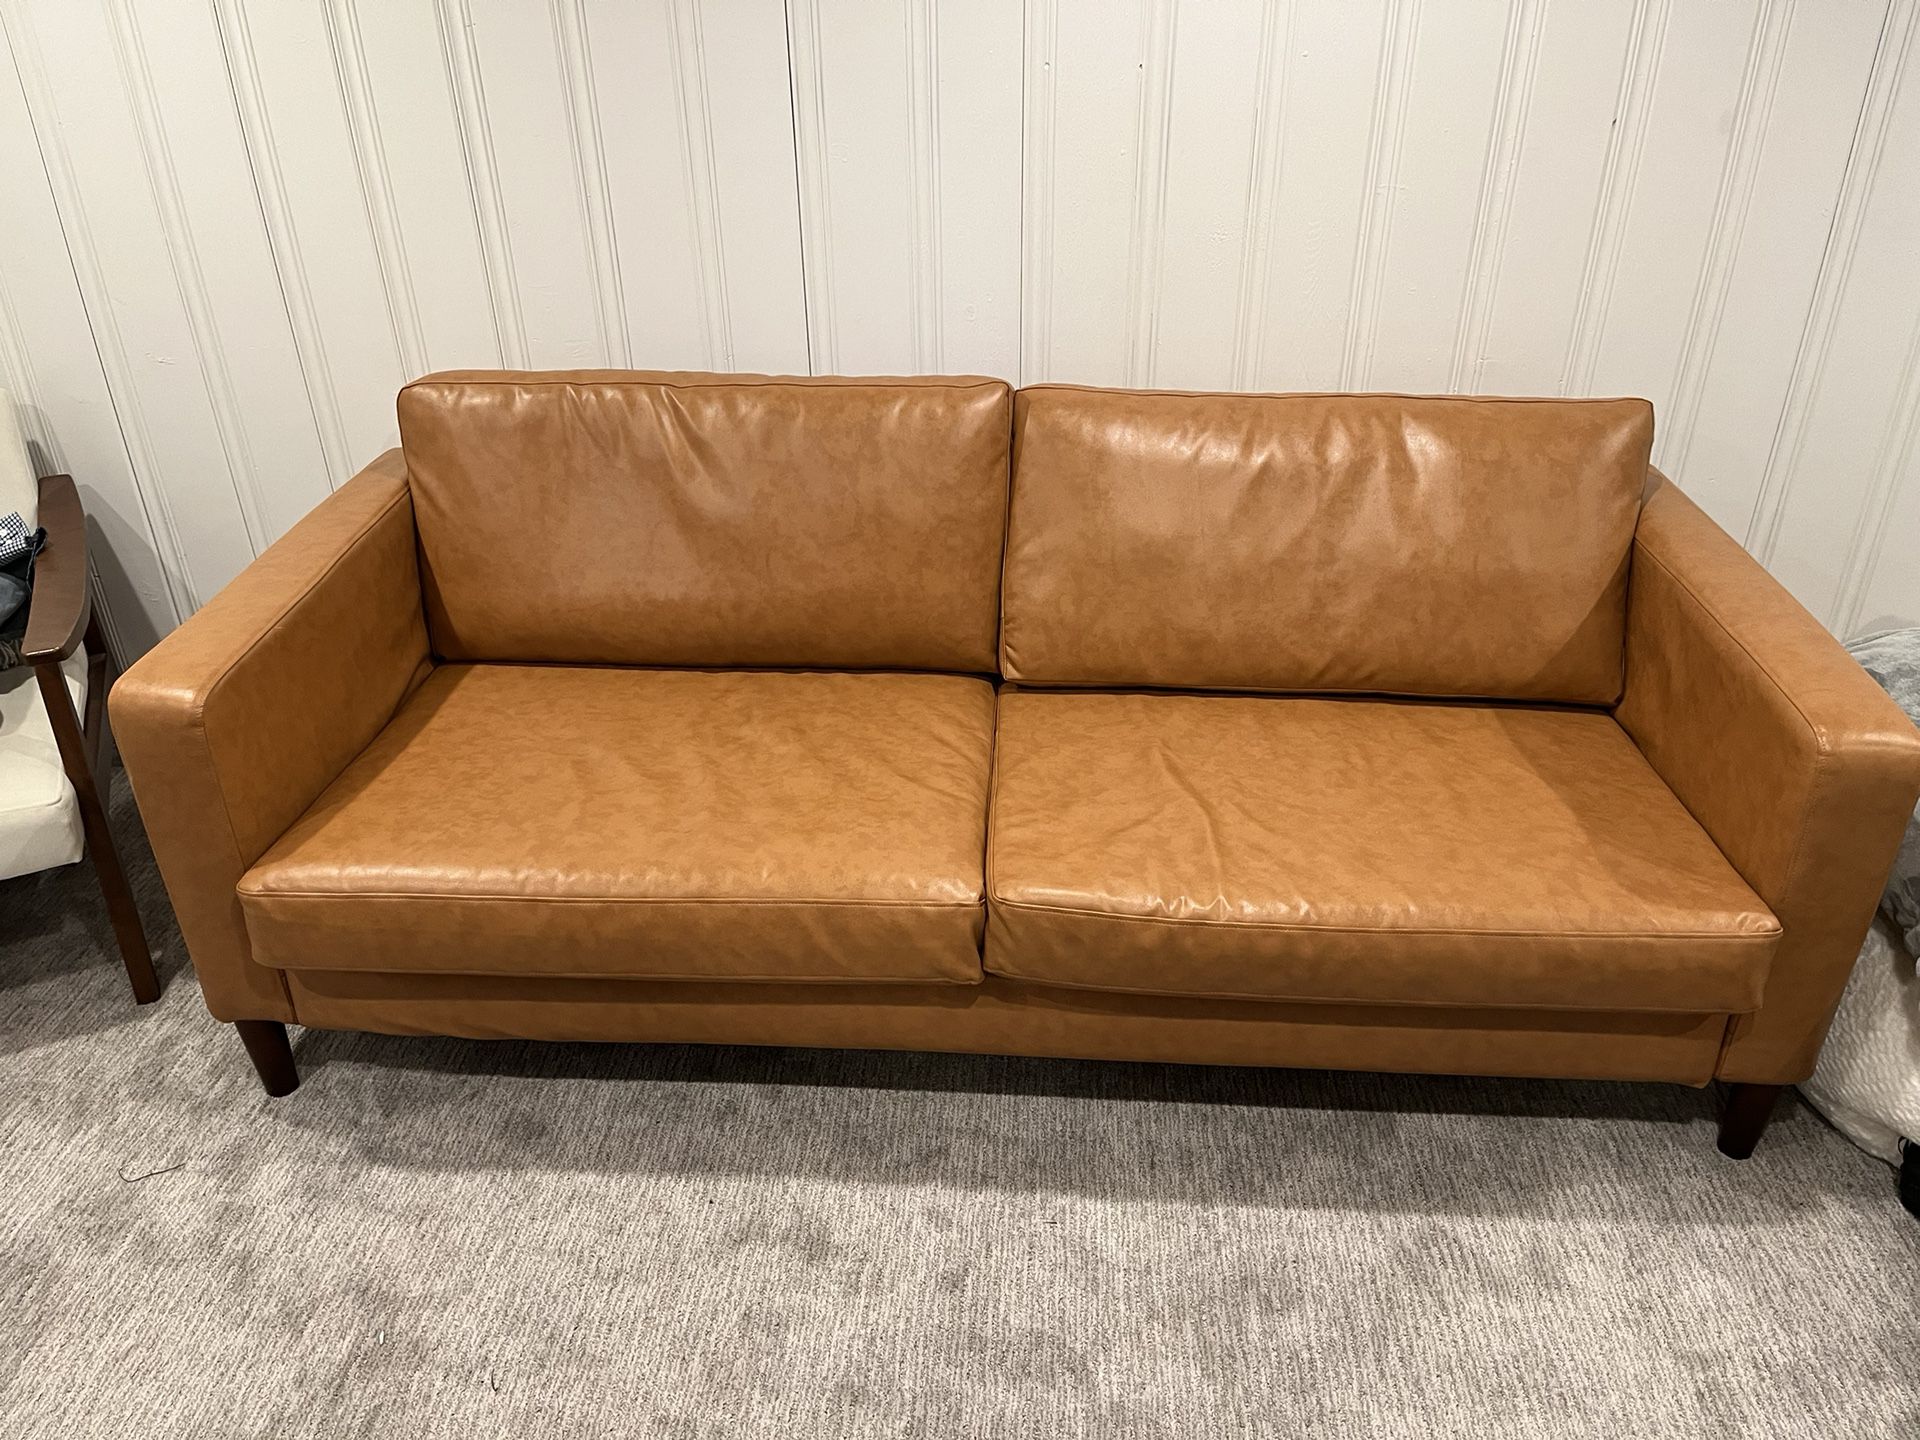 Rarely Used Leather couch